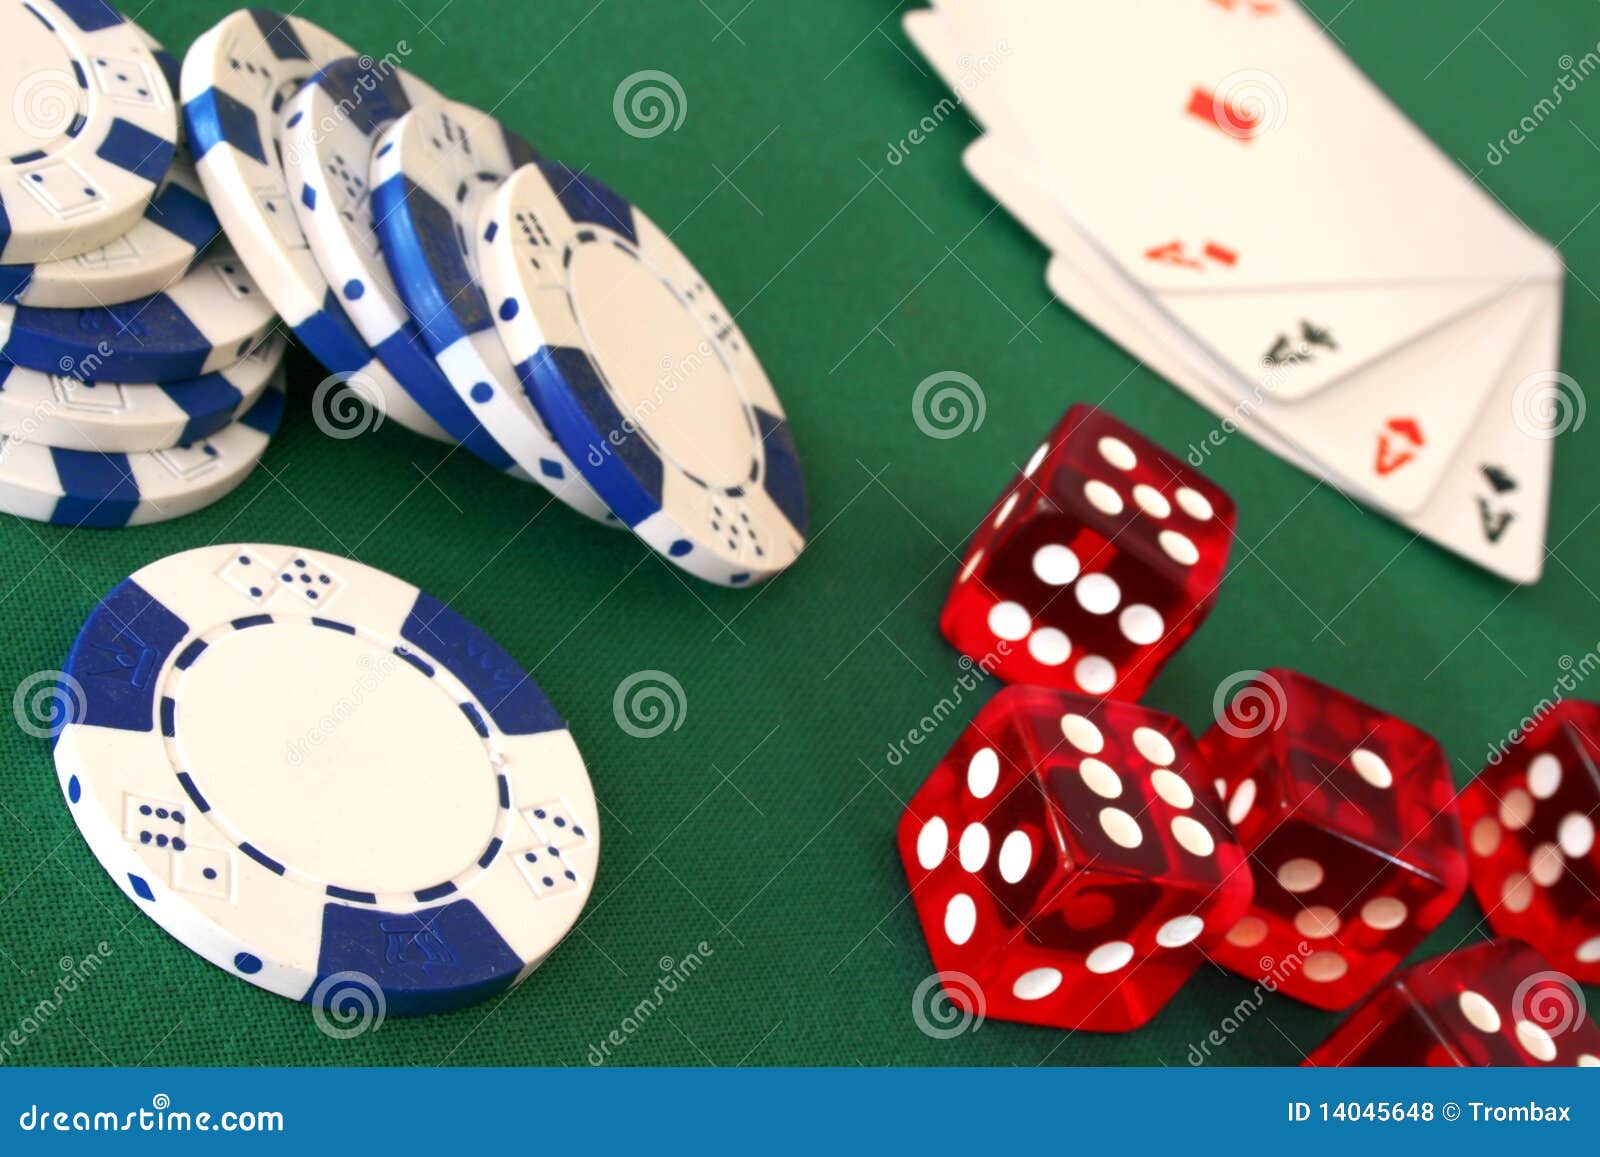 418+ Thousand Casino Games Royalty-Free Images, Stock Photos